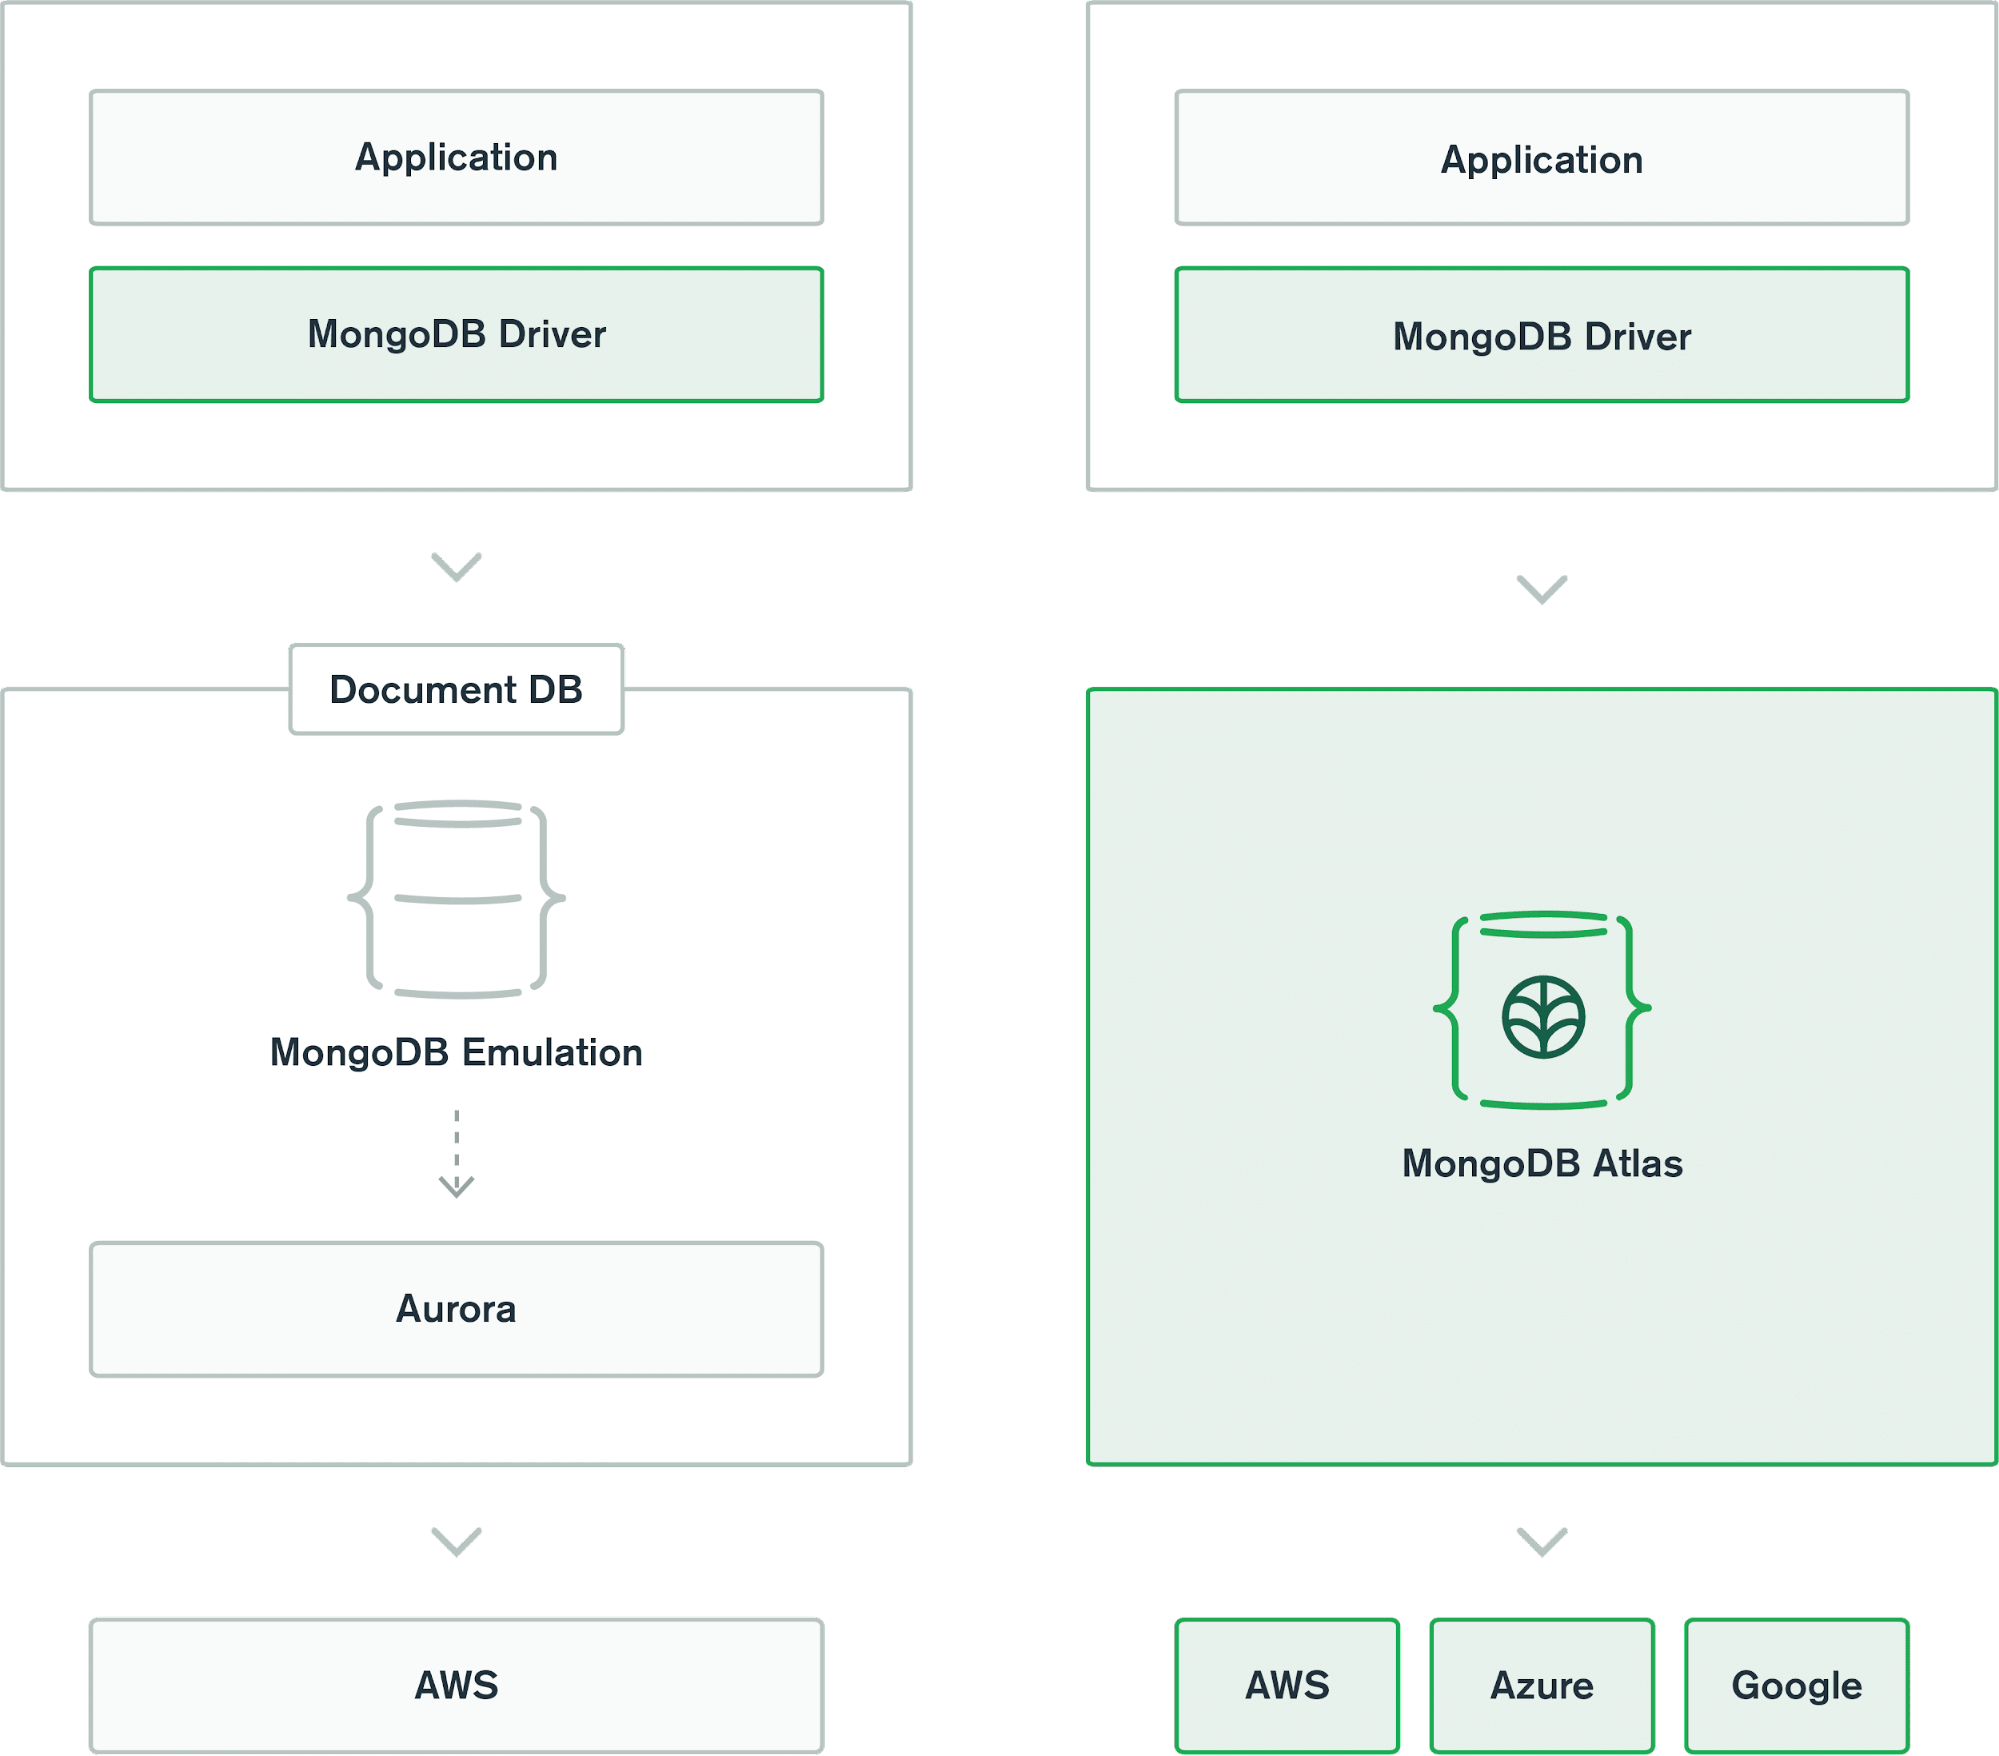 High level visual description of the DocumentDB and MongoDB Atlas architectures